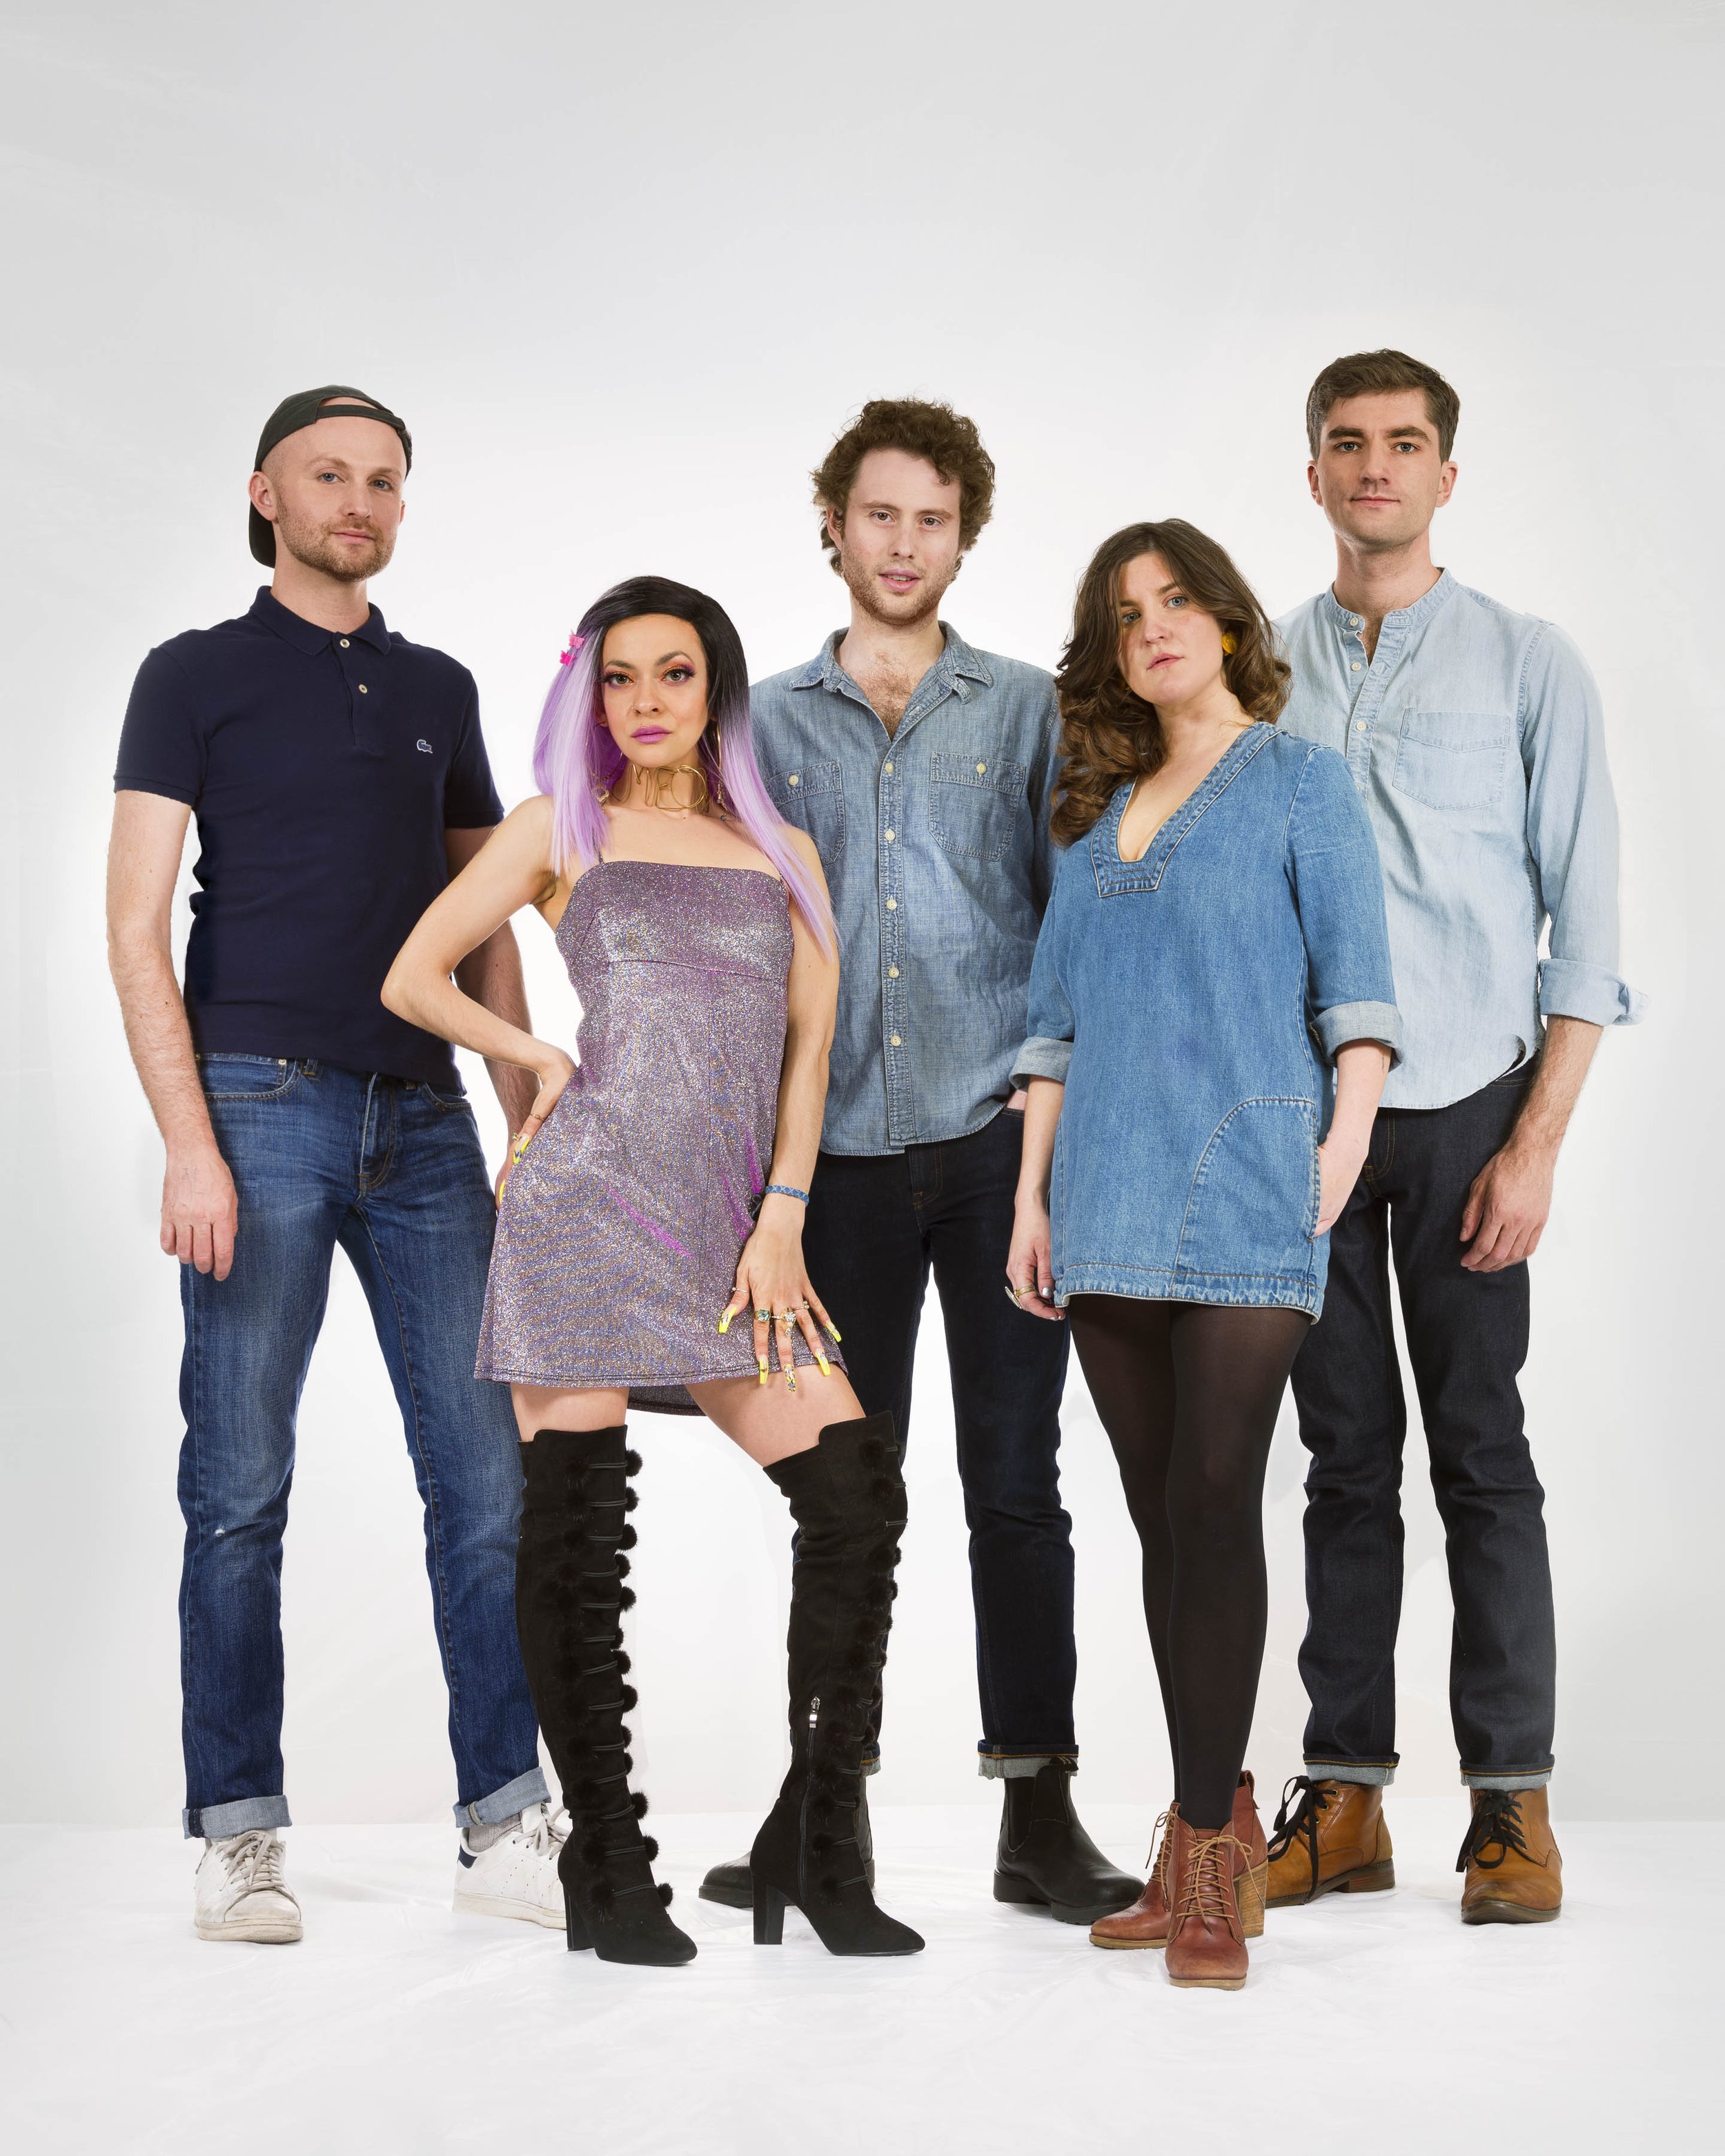 Group photos of theater production group Fake Friends standing in front of white background. From right to left: Michael Breslin, Catherine María "Cat" Rodríguez, Patrick Foley, Ariel Sibert, Rory Pelsue